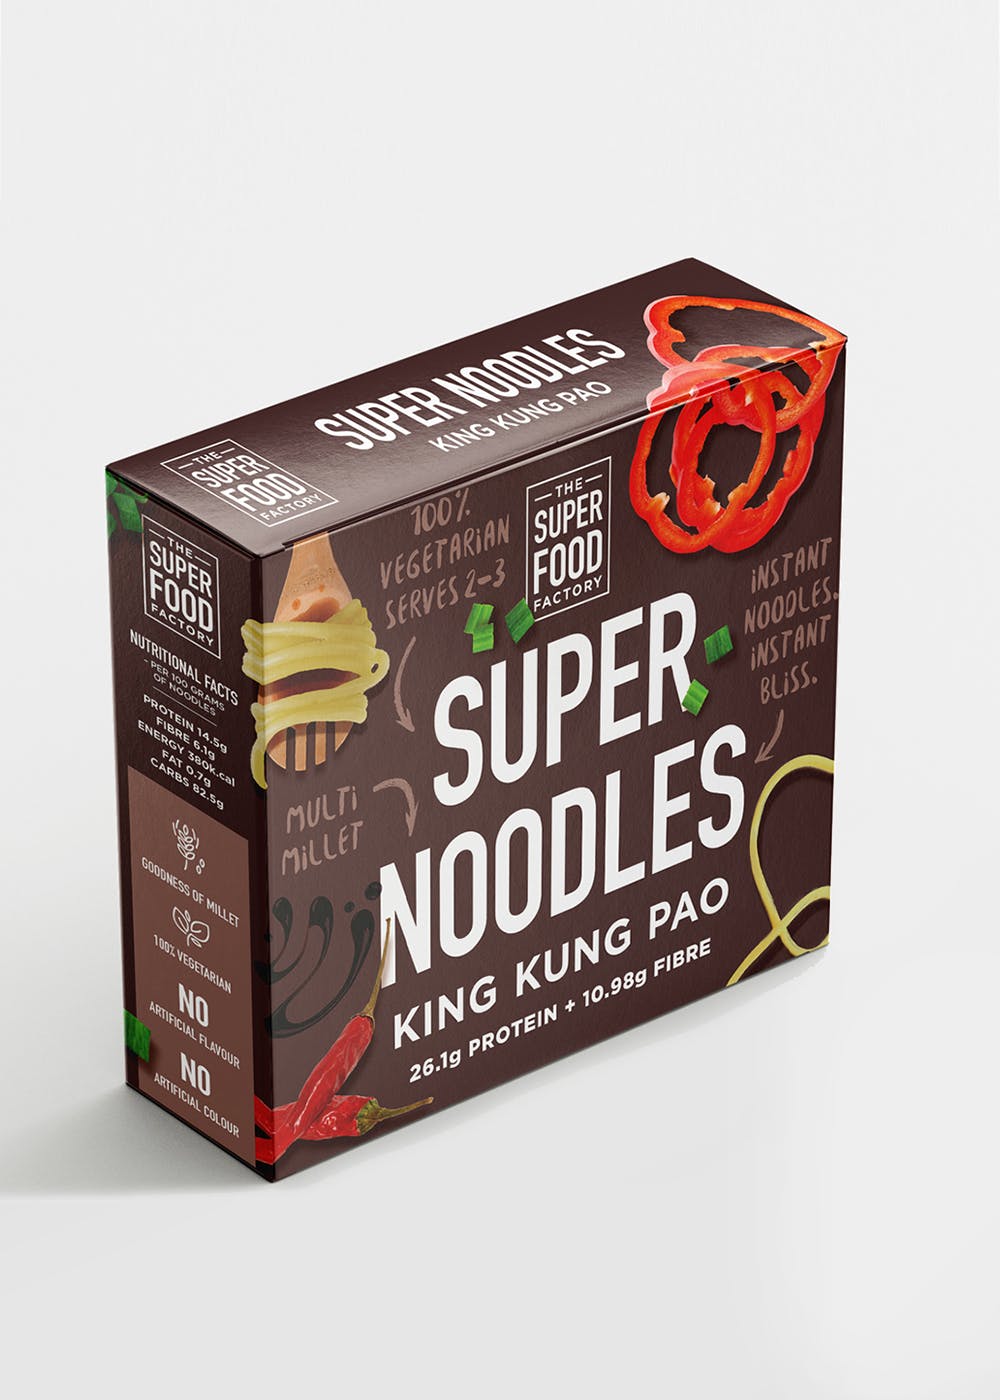 Super Noodles - King Kung Pao (207gm)